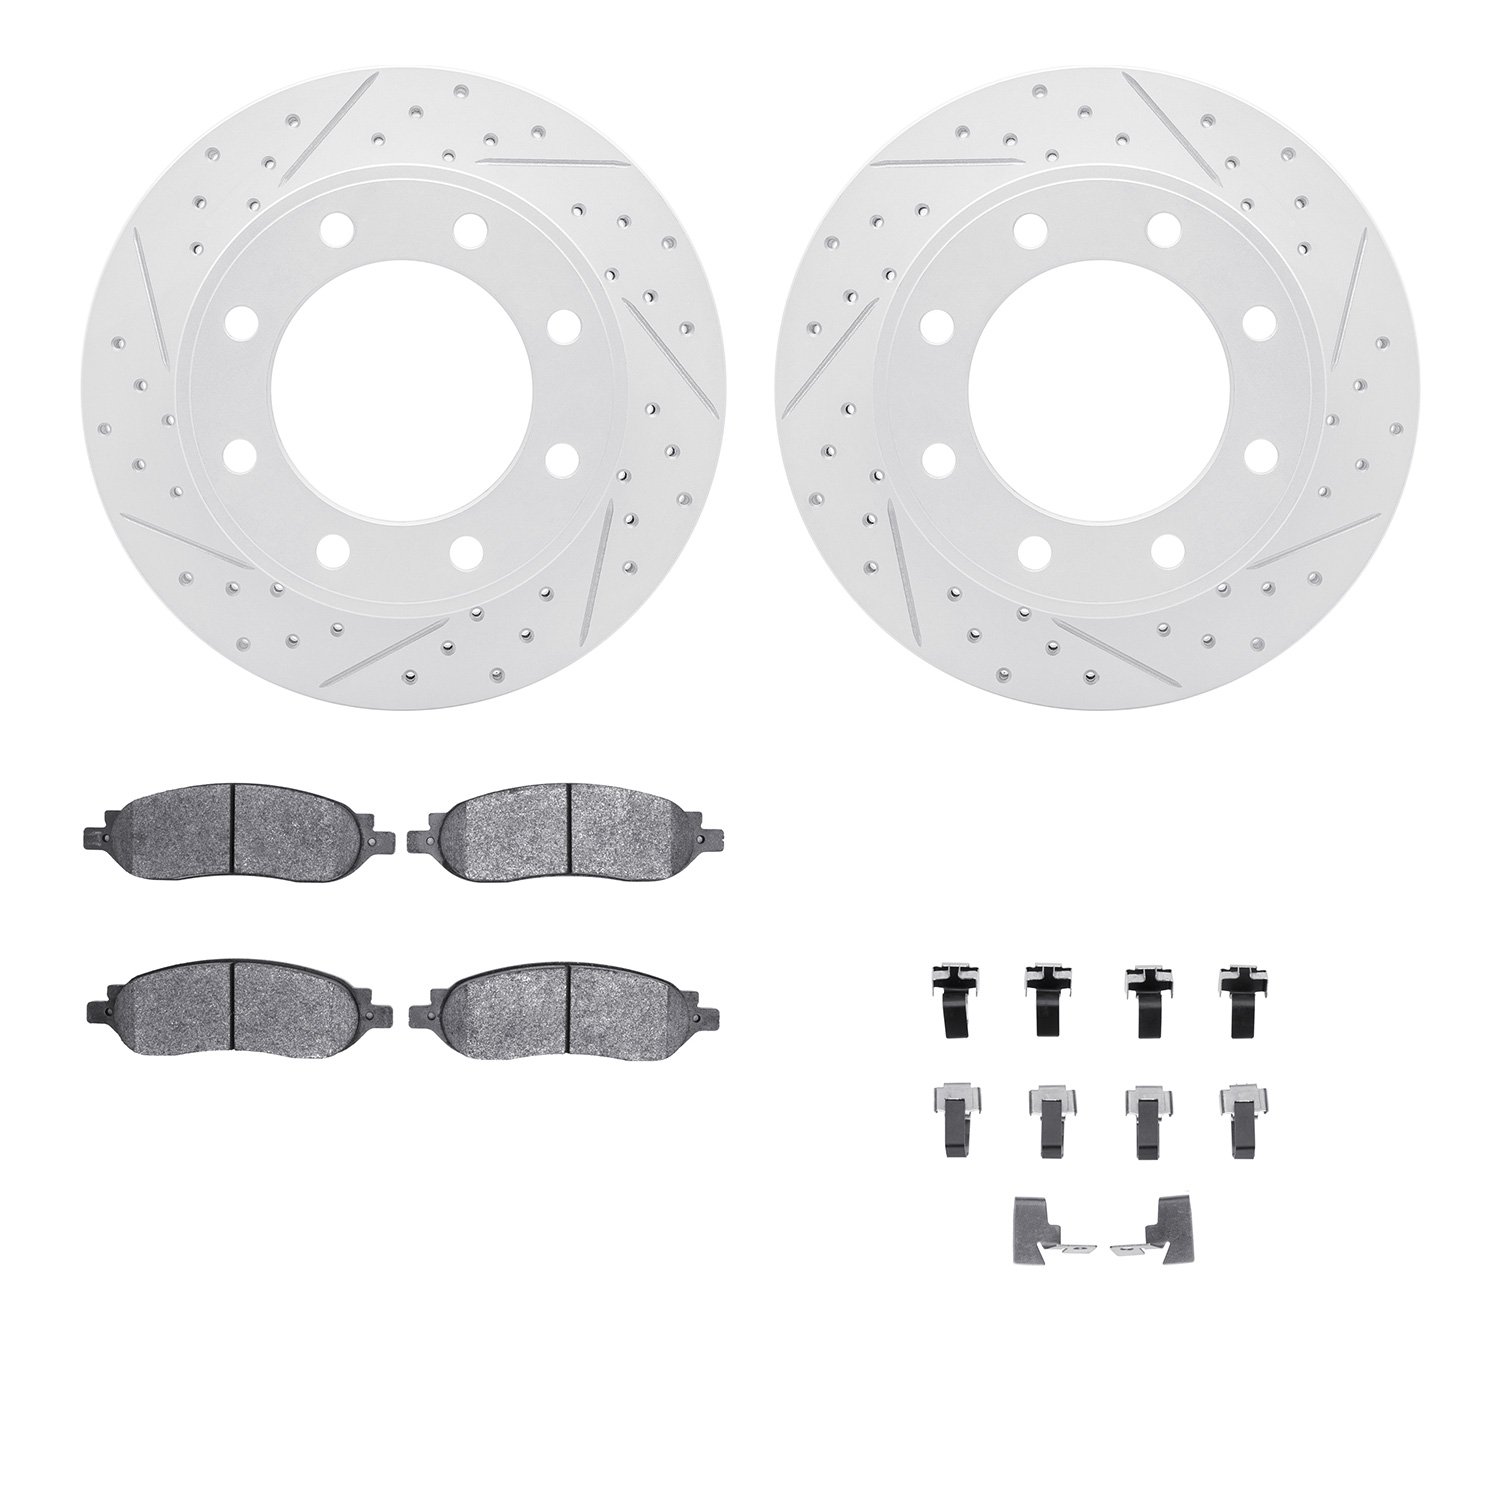 2212-99155 Geoperformance Drilled/Slotted Rotors w/Heavy-Duty Pads Kit & Hardware, 2005-2007 Ford/Lincoln/Mercury/Mazda, Positio